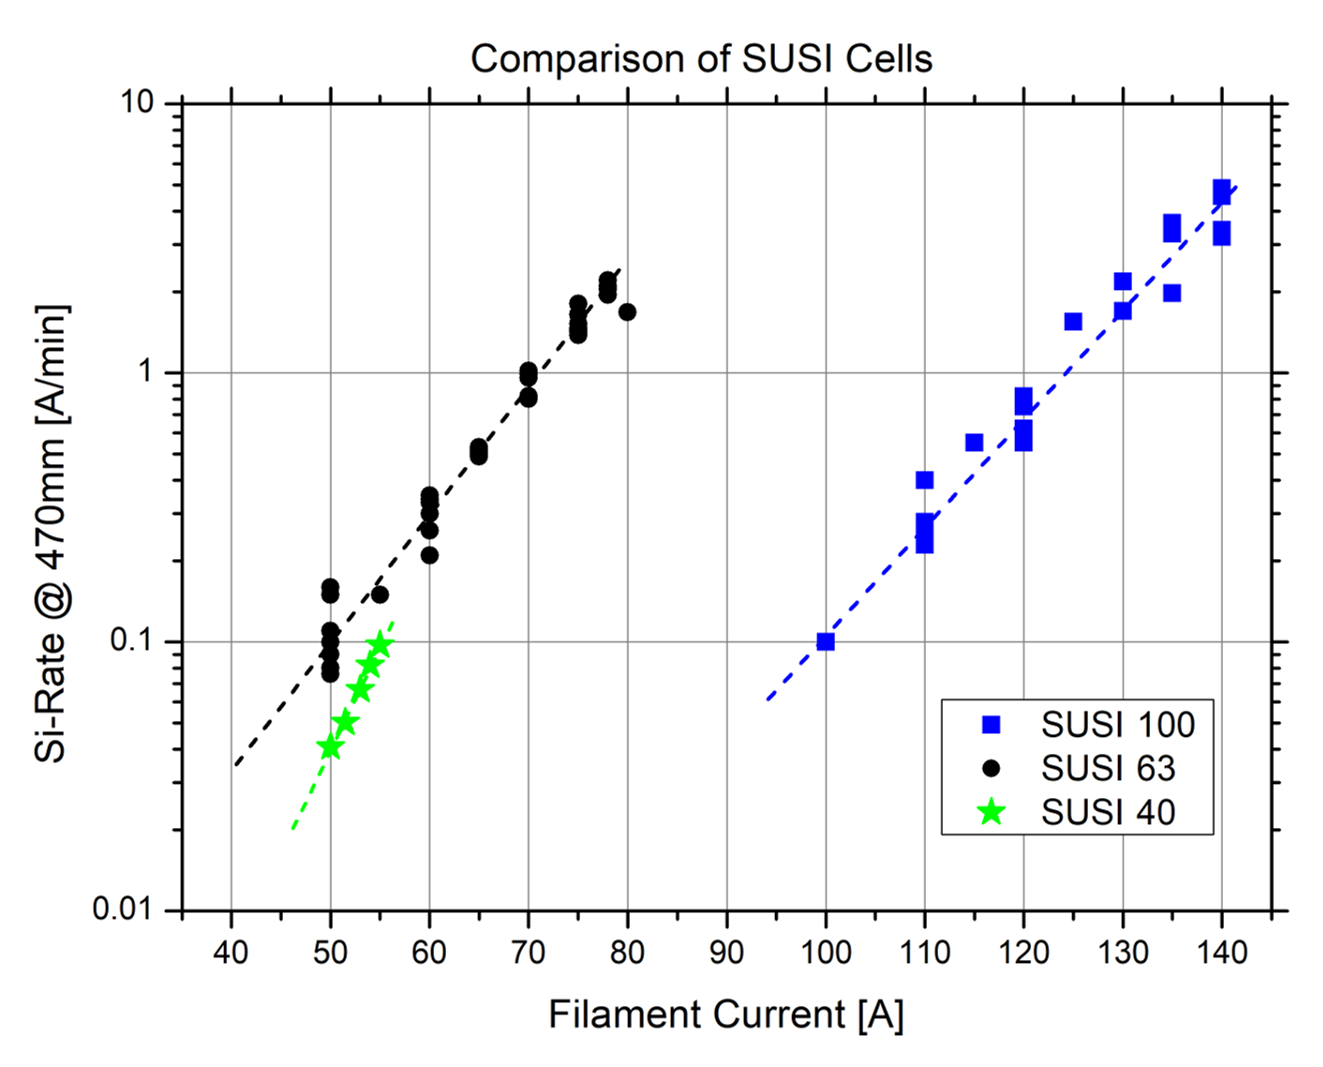 Growth rates of different SUSI types